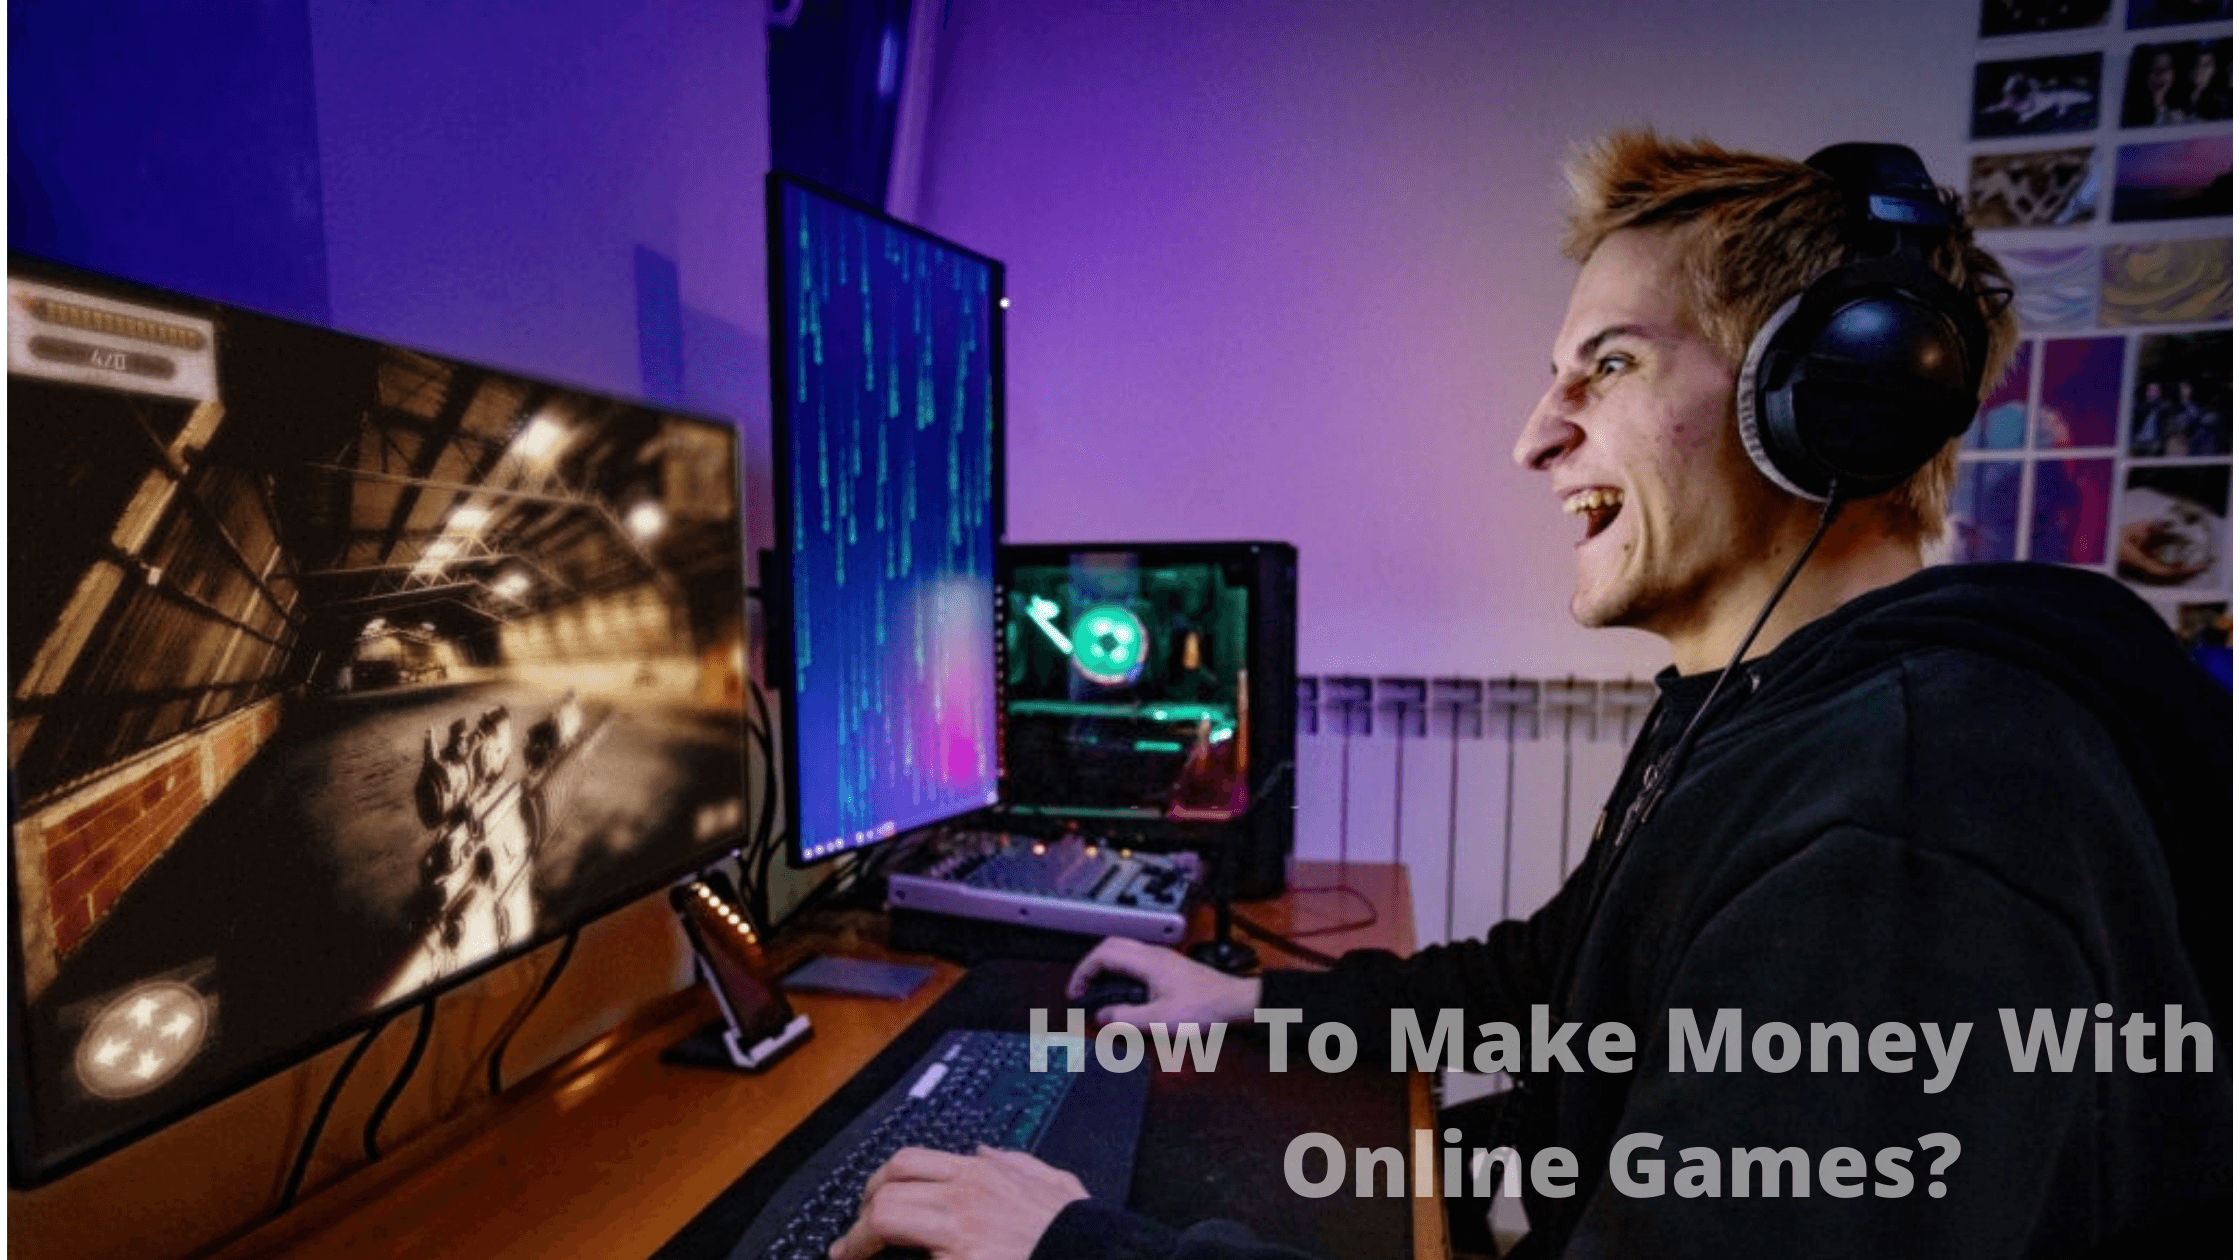 Earn money with online games